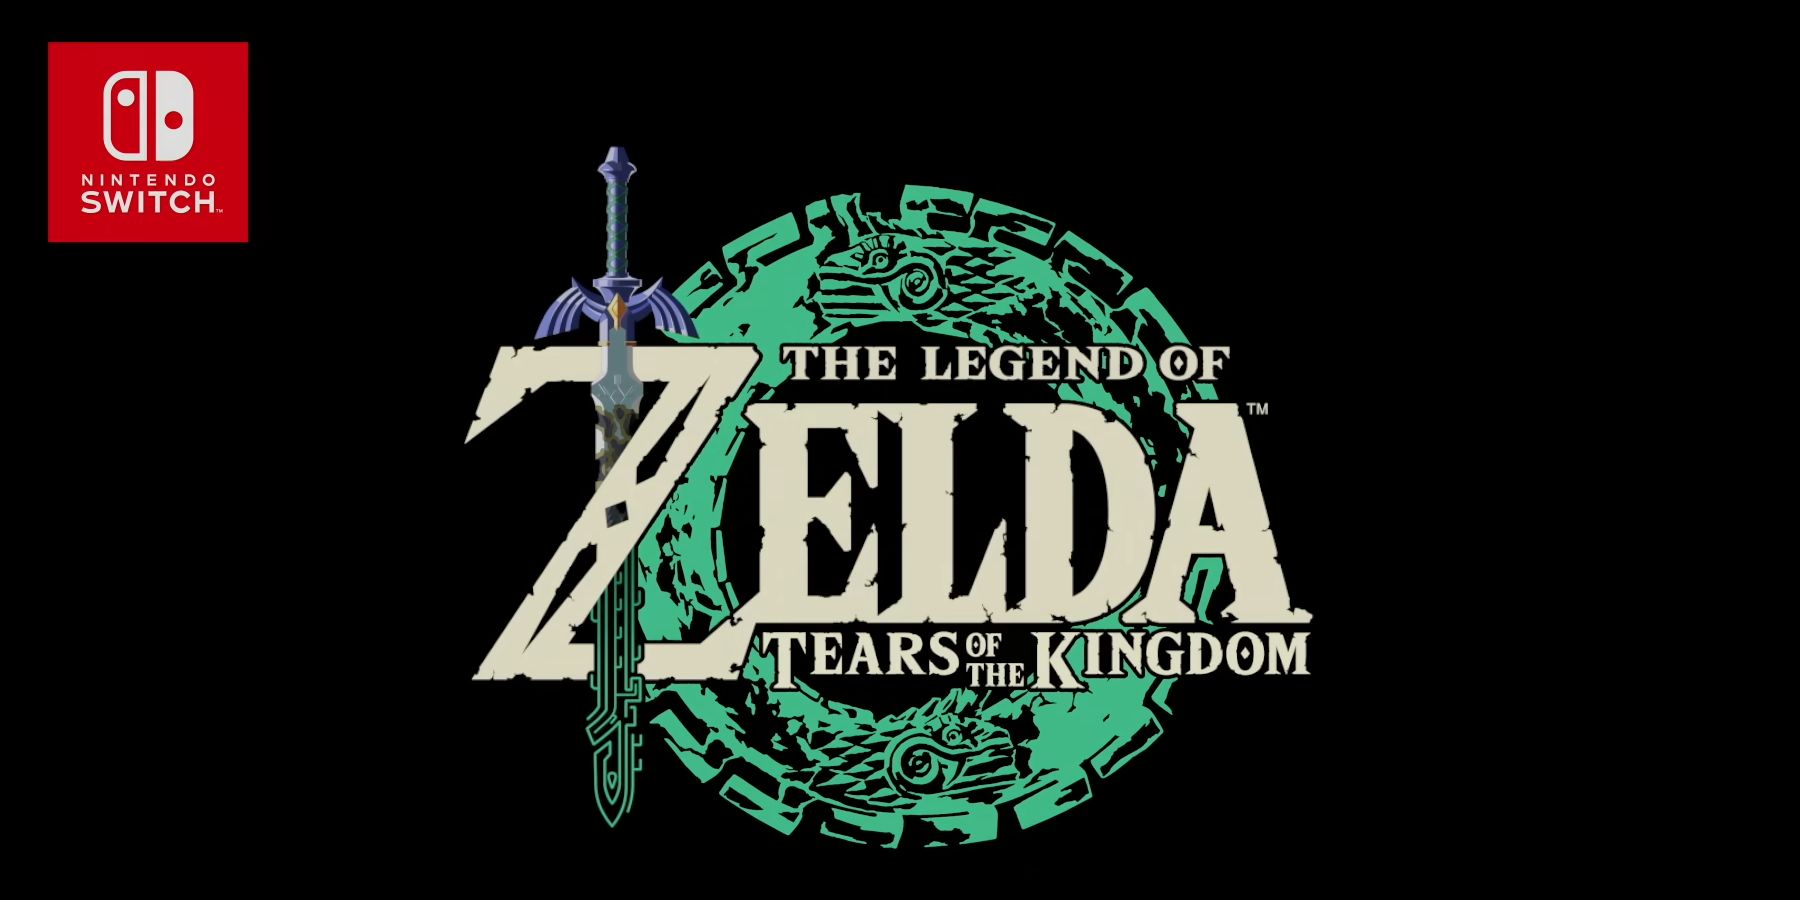 Official title art, reading "The Legend Of Zelda: Tears Of The Kingdom," with two green dragons making a ring around the title, and a sword with abstract linework on the left. Image source: Nintendo